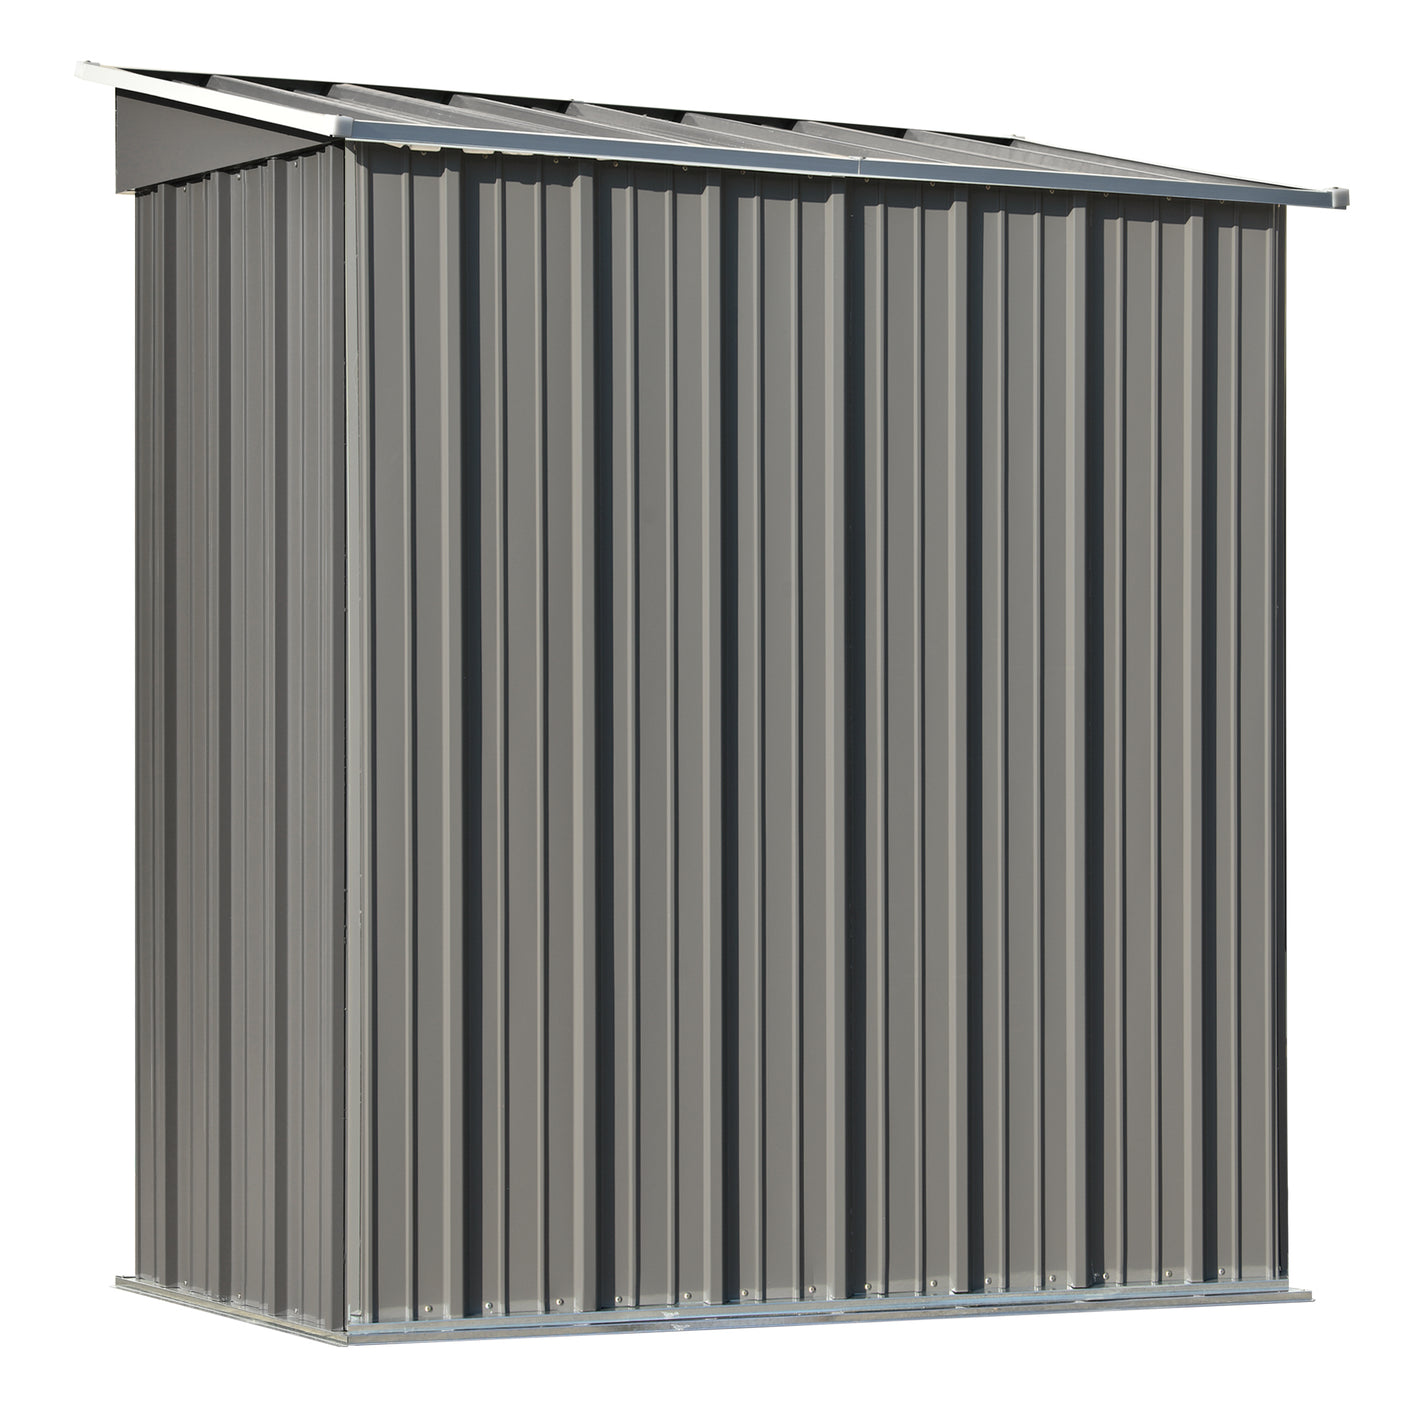 TOPMAX Patio 5ft Wx3ft. L Garden Shed, Metal Lean-to Storage Shed with Lockable Door, Tool Cabinet for Backyard, Lawn, Garden, Gray